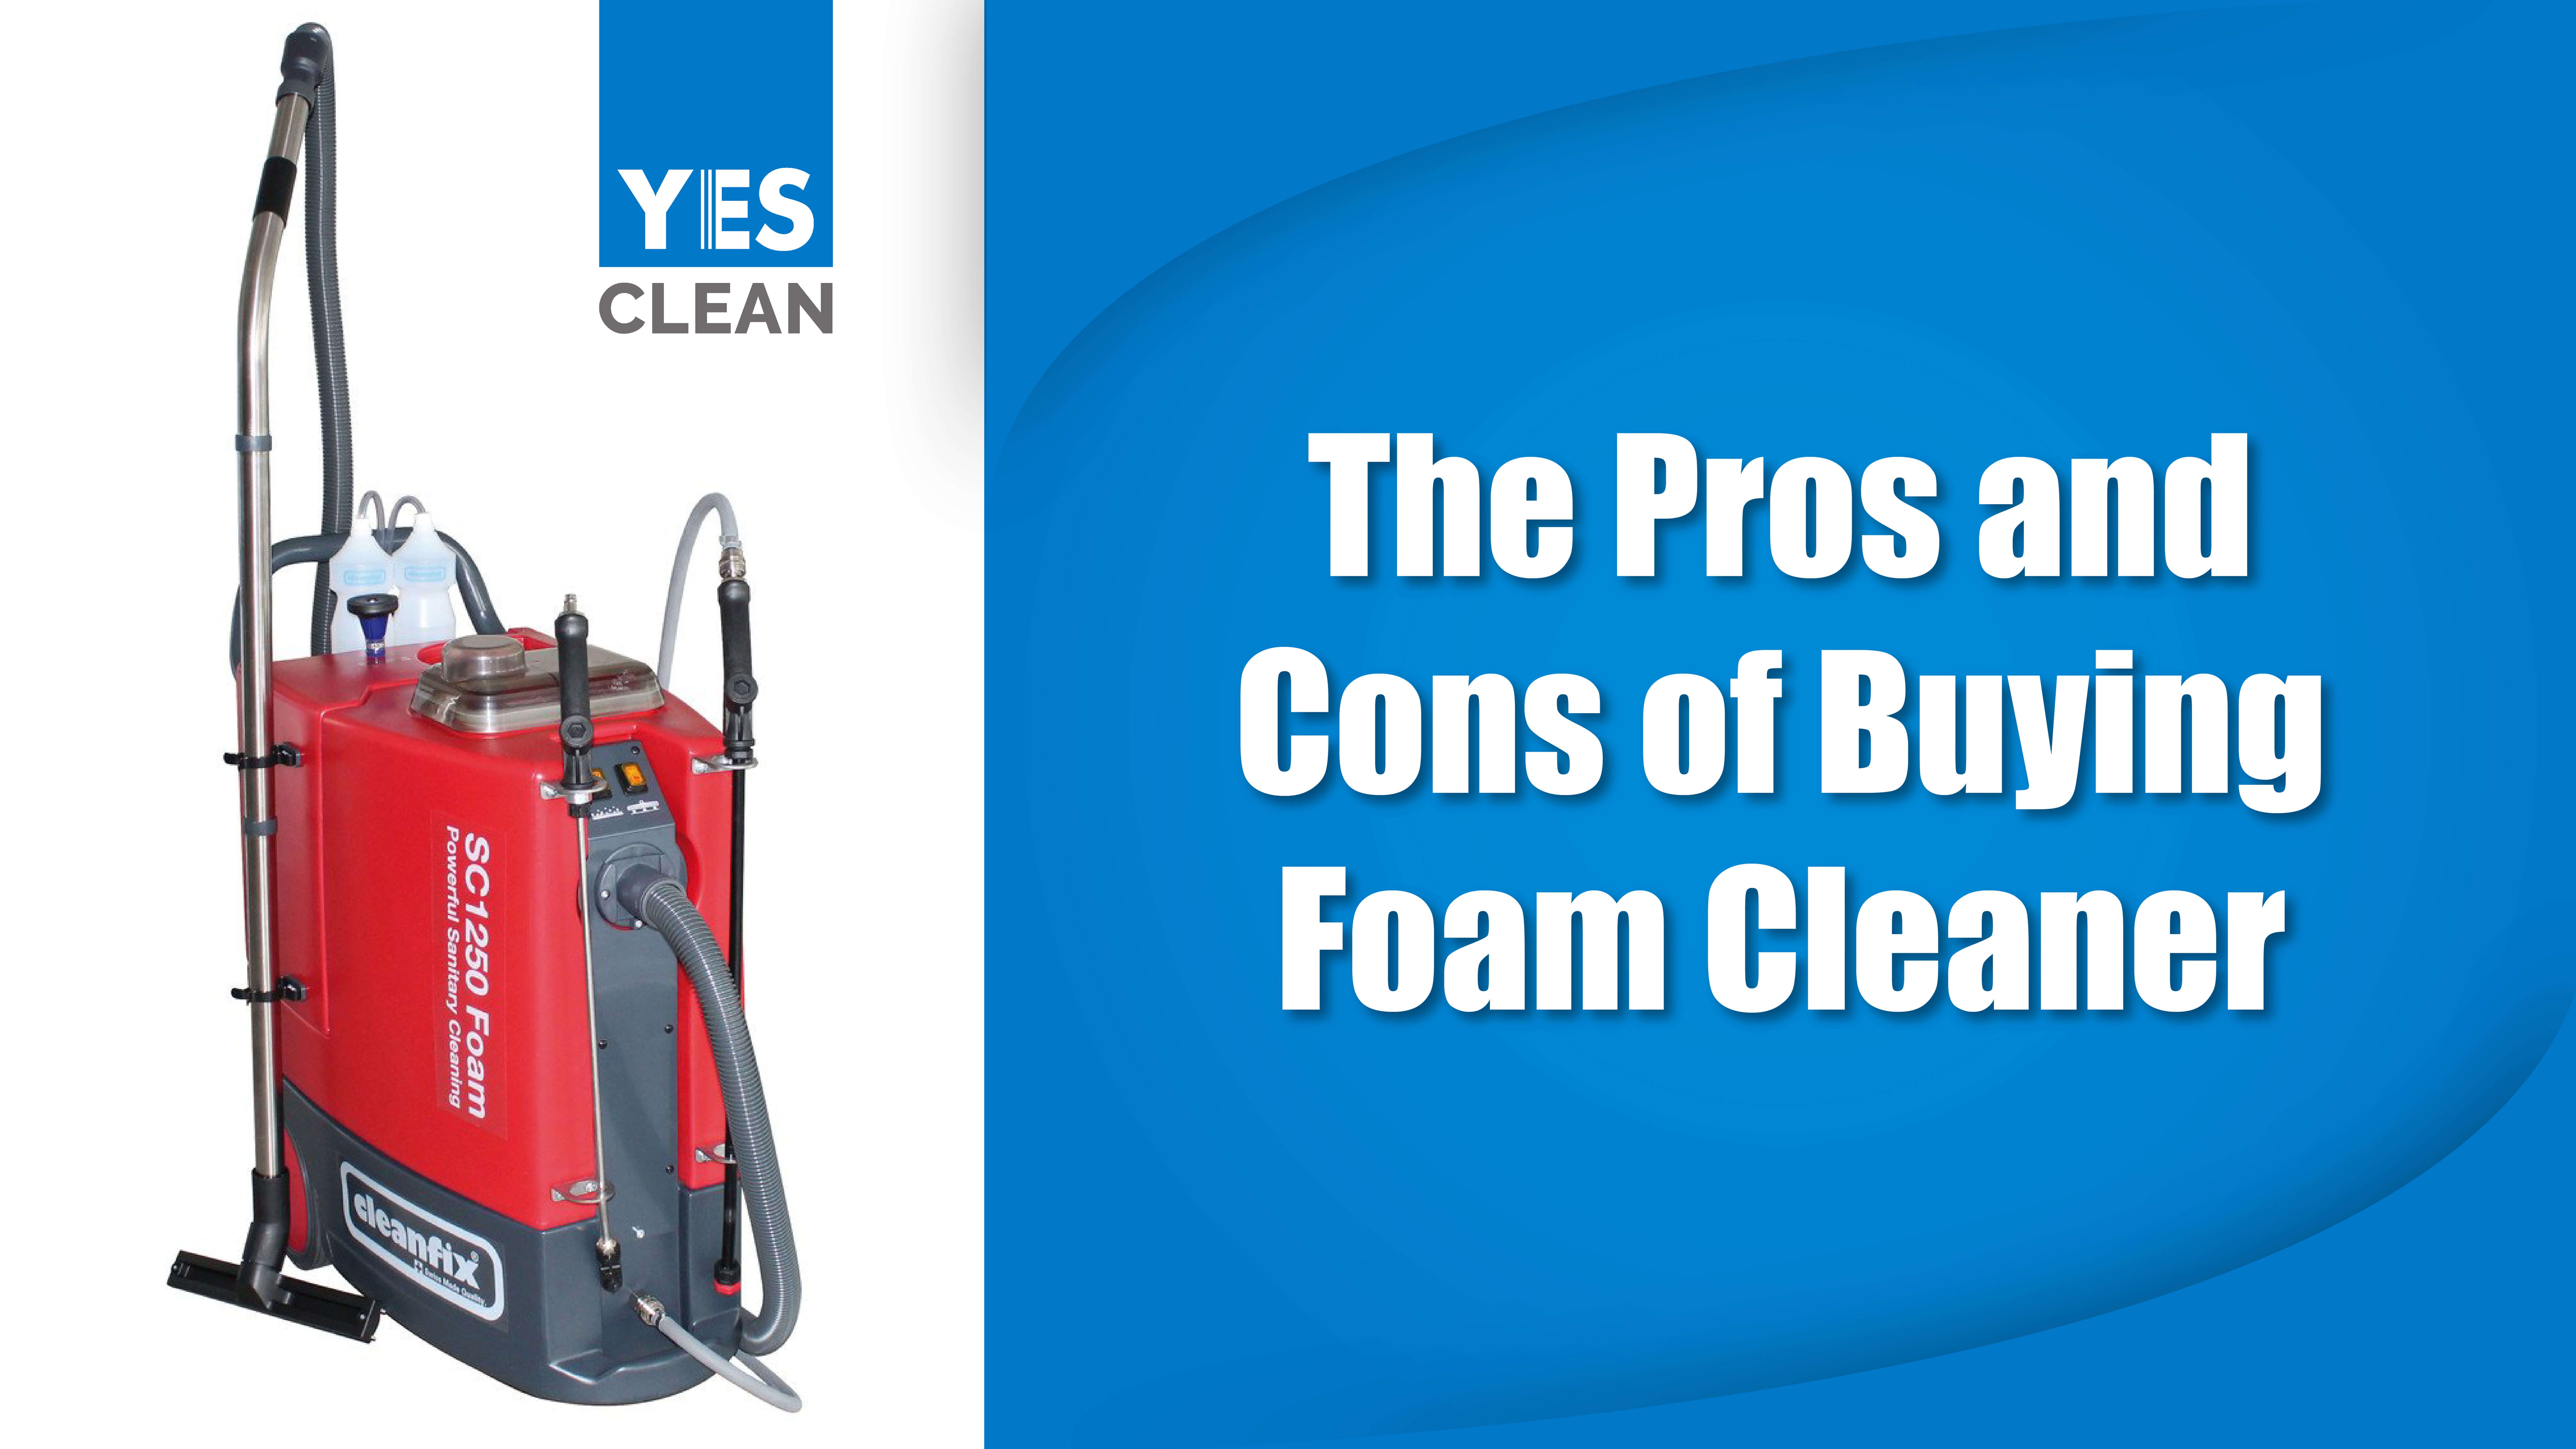 The Pros and Cons of Buying Foam Cleaner